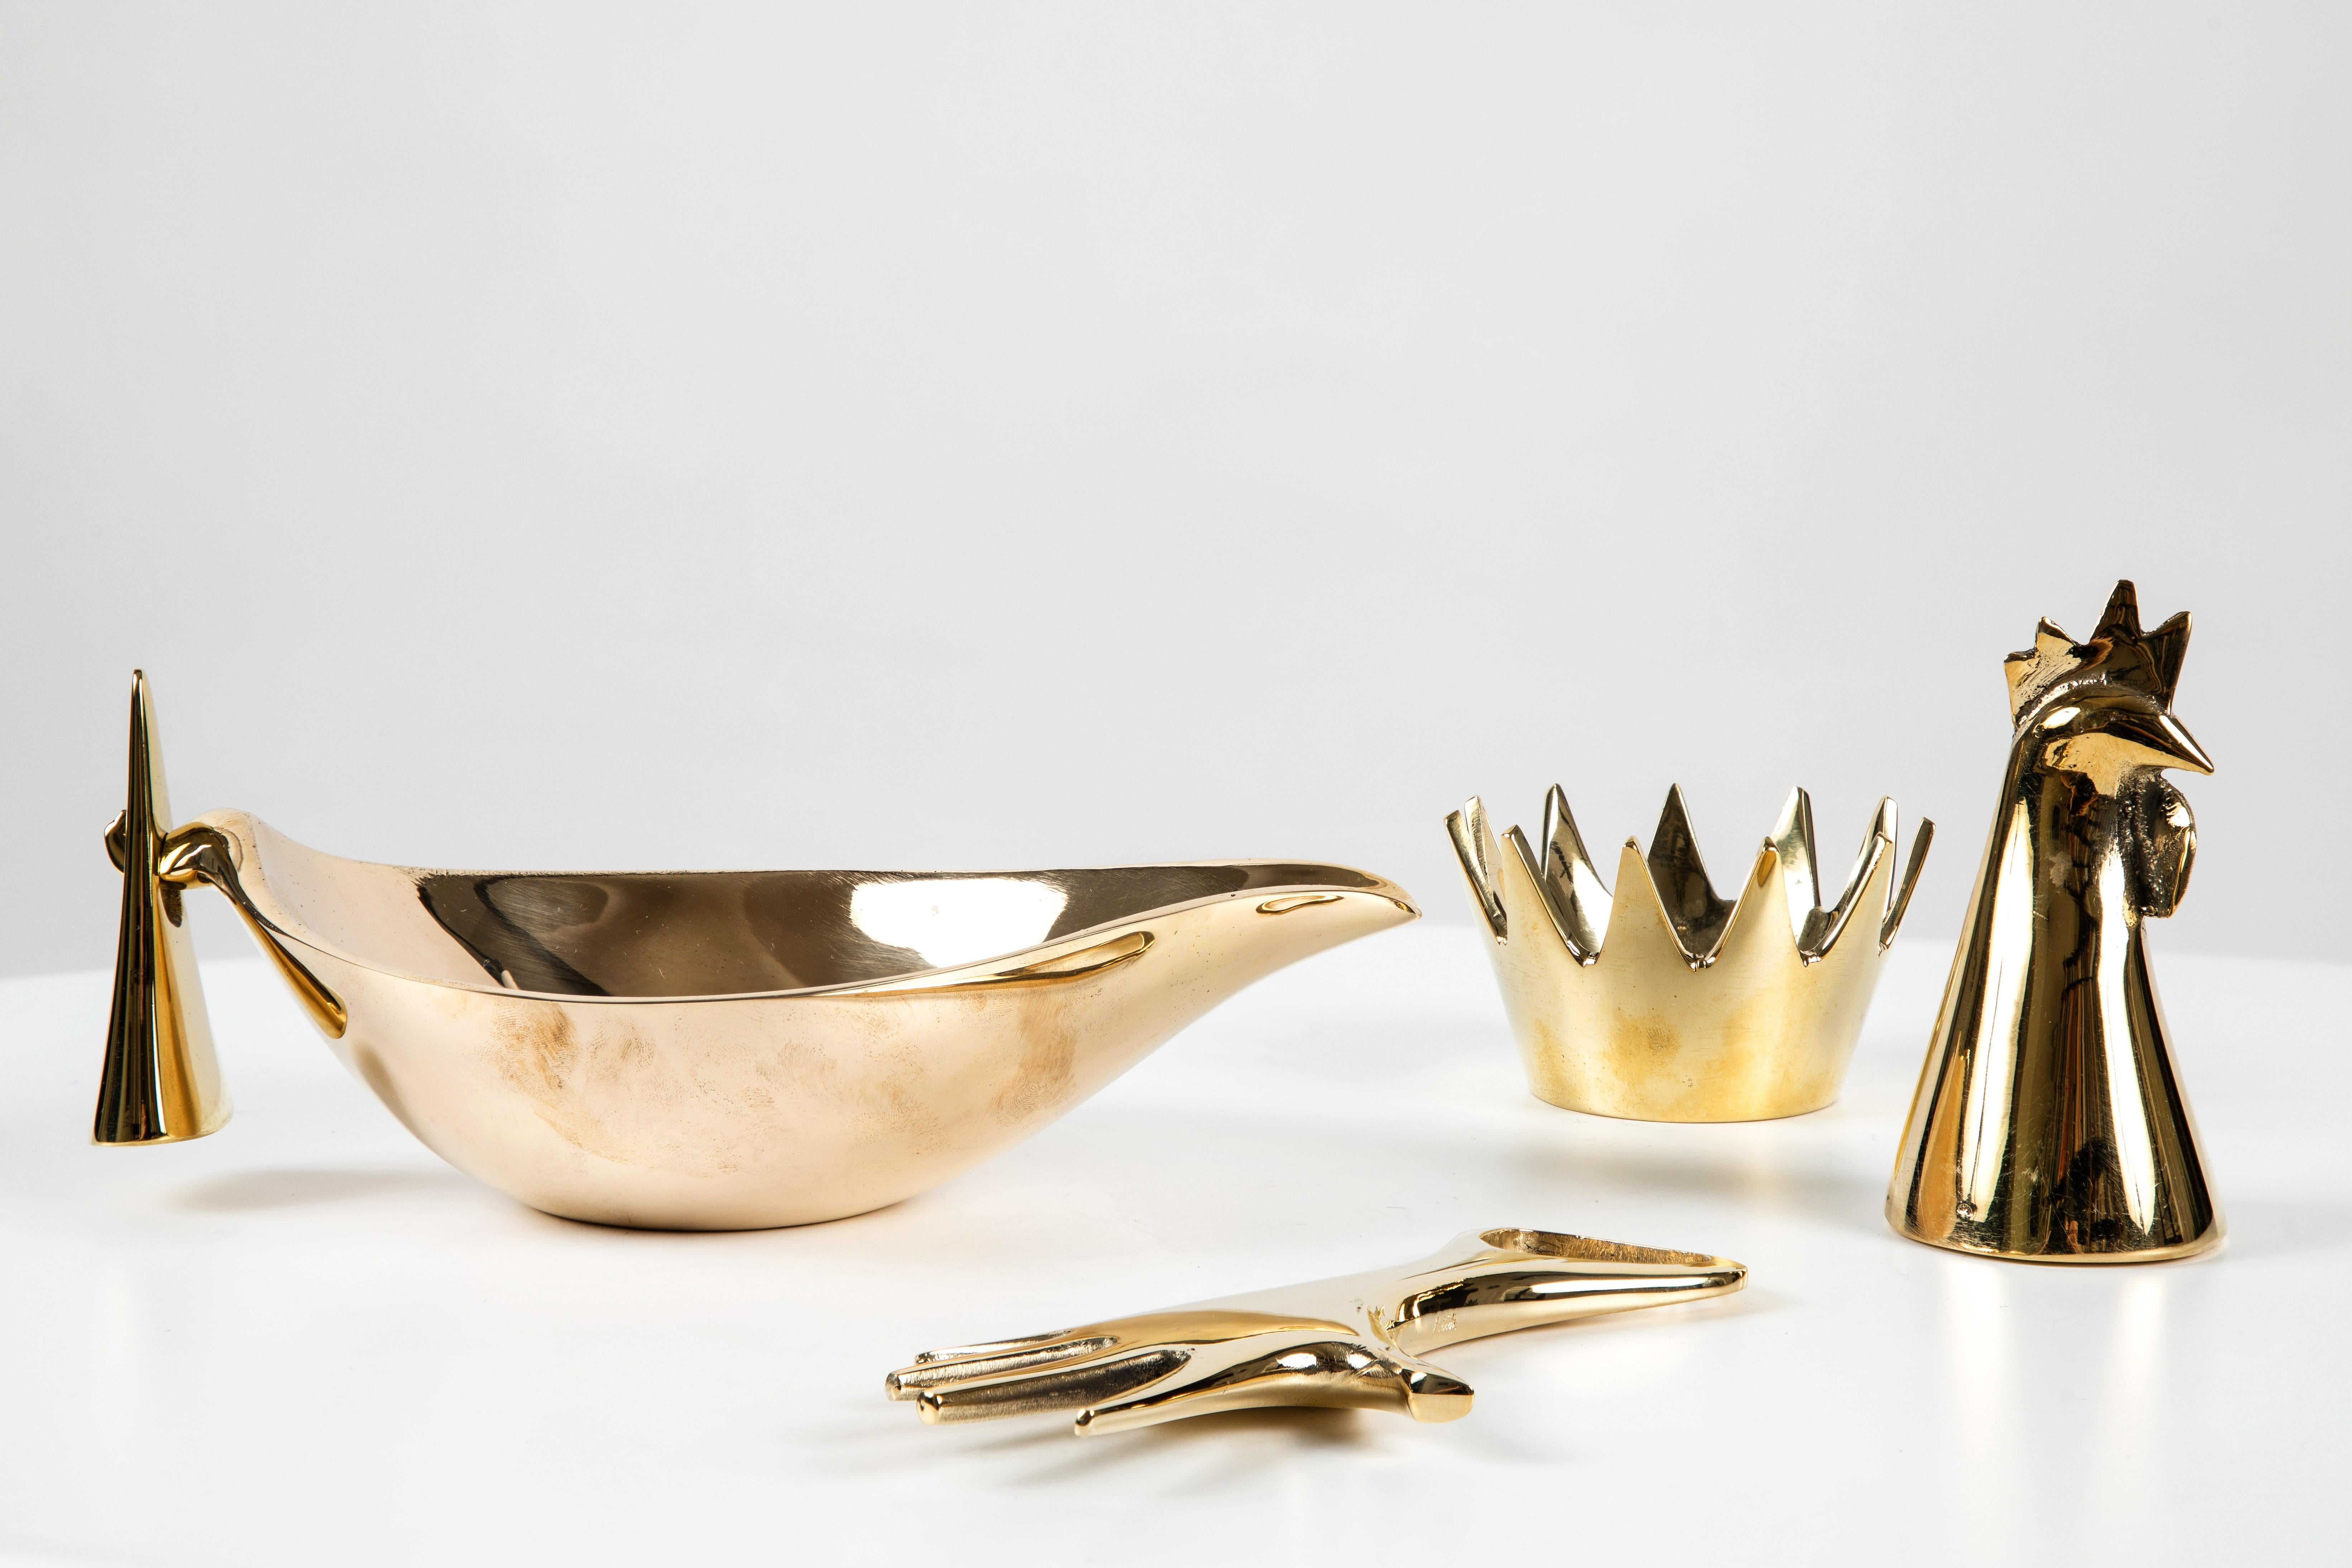 Set of four Carl Auböck brass objects. Includes Carl Auböck model #4072/G 'Rooster' brass bell, model #3600 'Crown' brass bowl, model #3514 brass bowl and model #4224 'Hand' brass bottle opener. Designed in the 1950s, these incredibly refined and